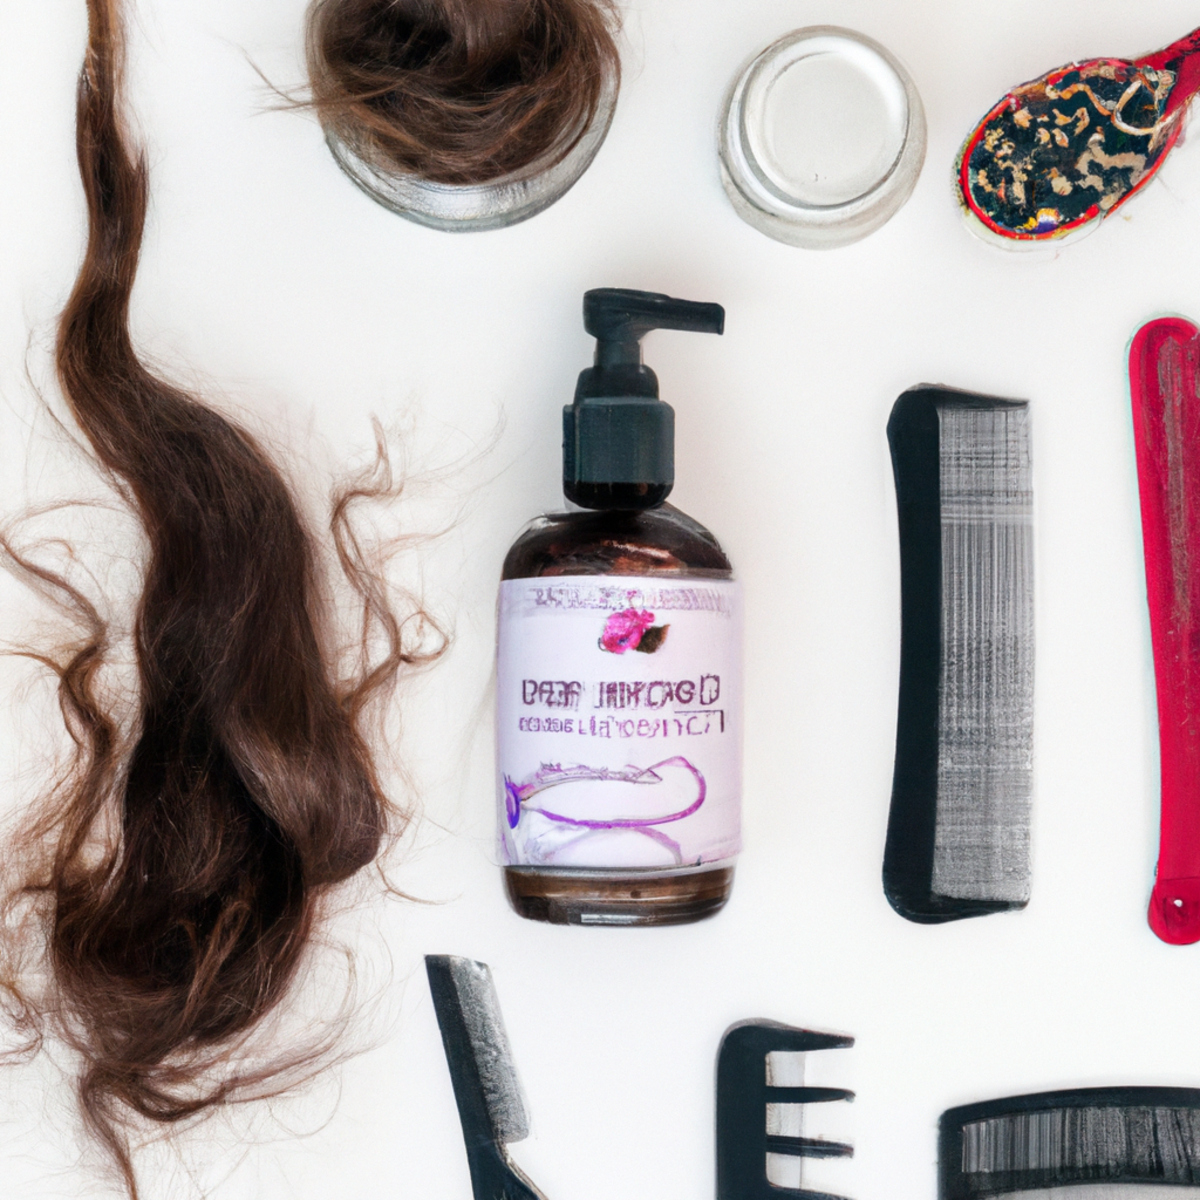 Hair care products promoting healthy hair growth, including a hair growth serum, comb, brush, scalp massager, and hair ties.